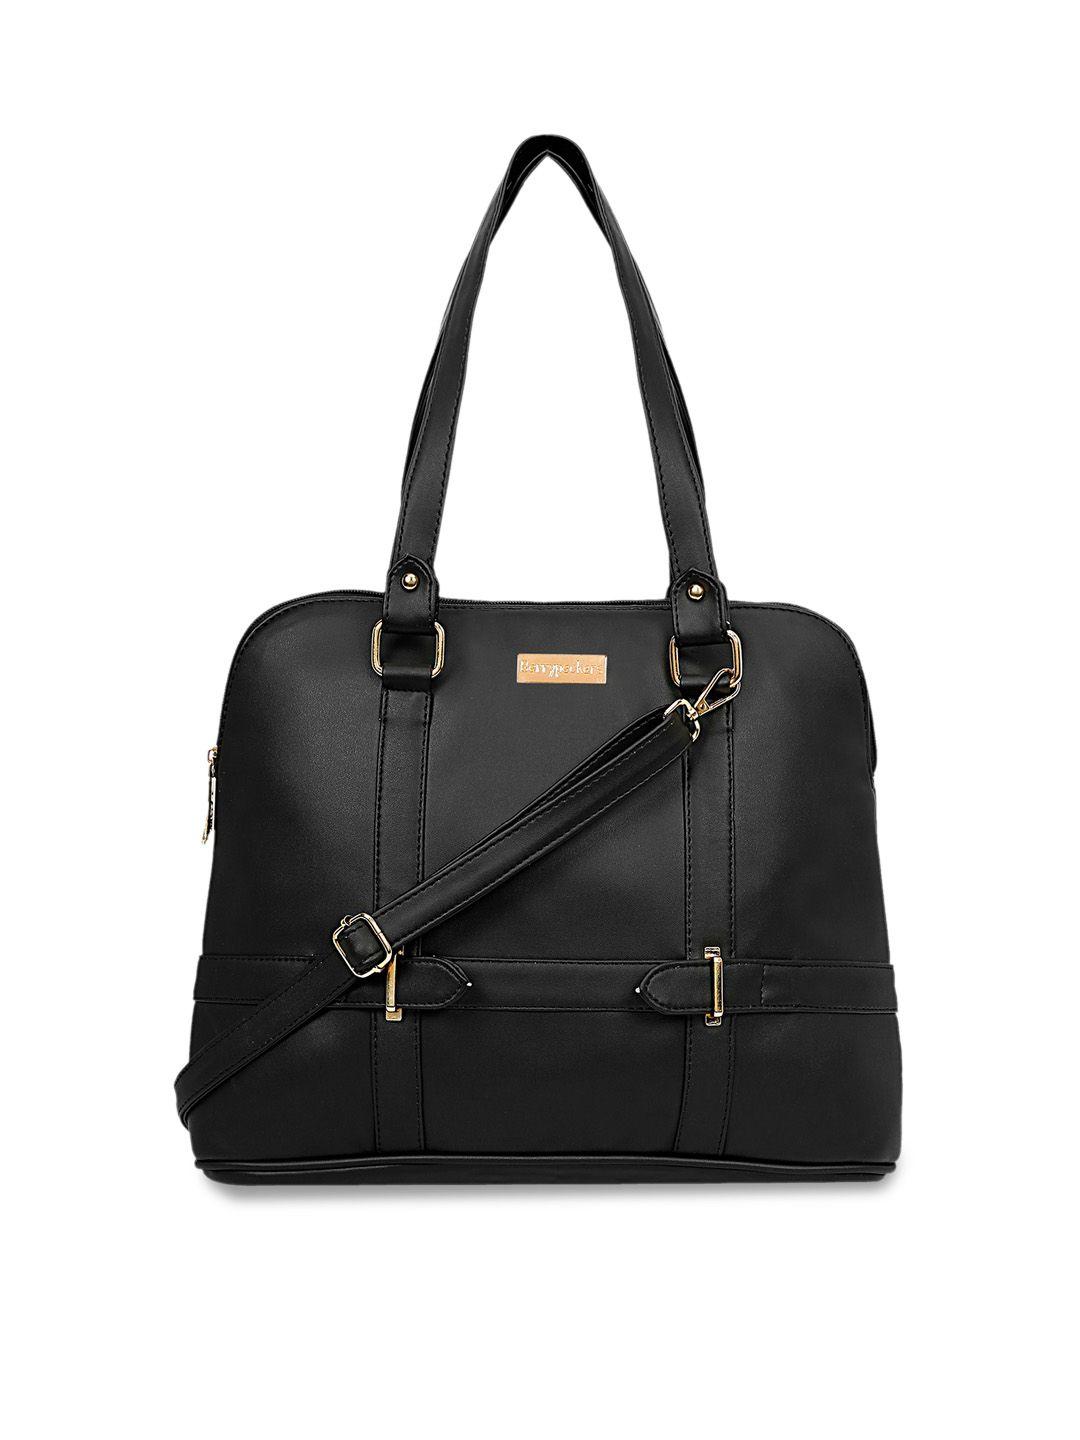 berrypeckers black structured handheld bag with tasselled